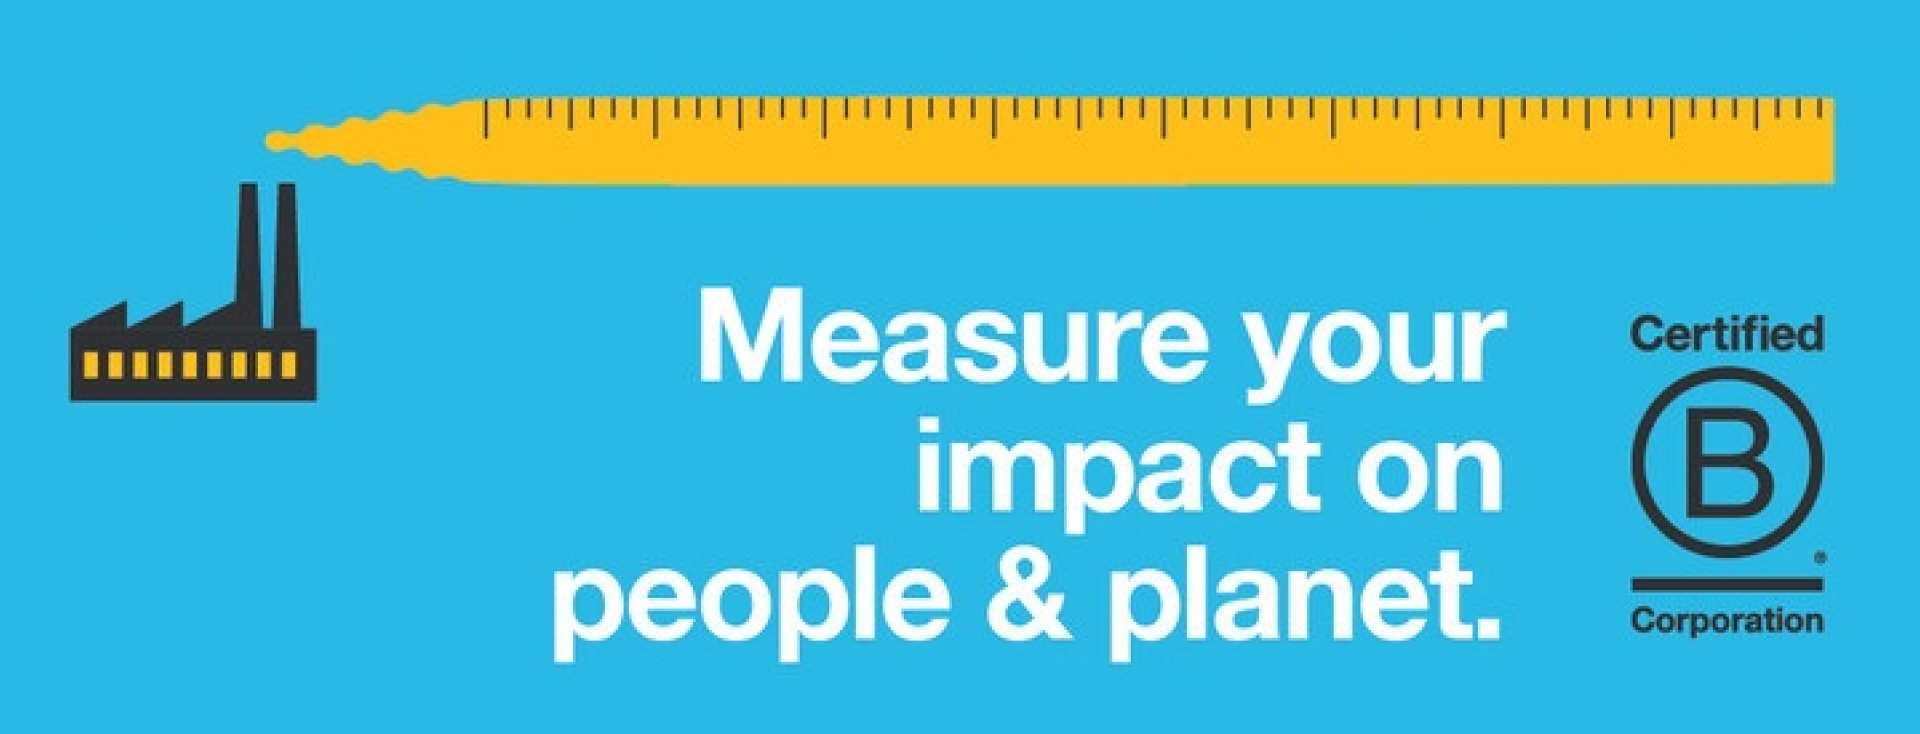 B Hive Banner Measure Your Impact on people & planet